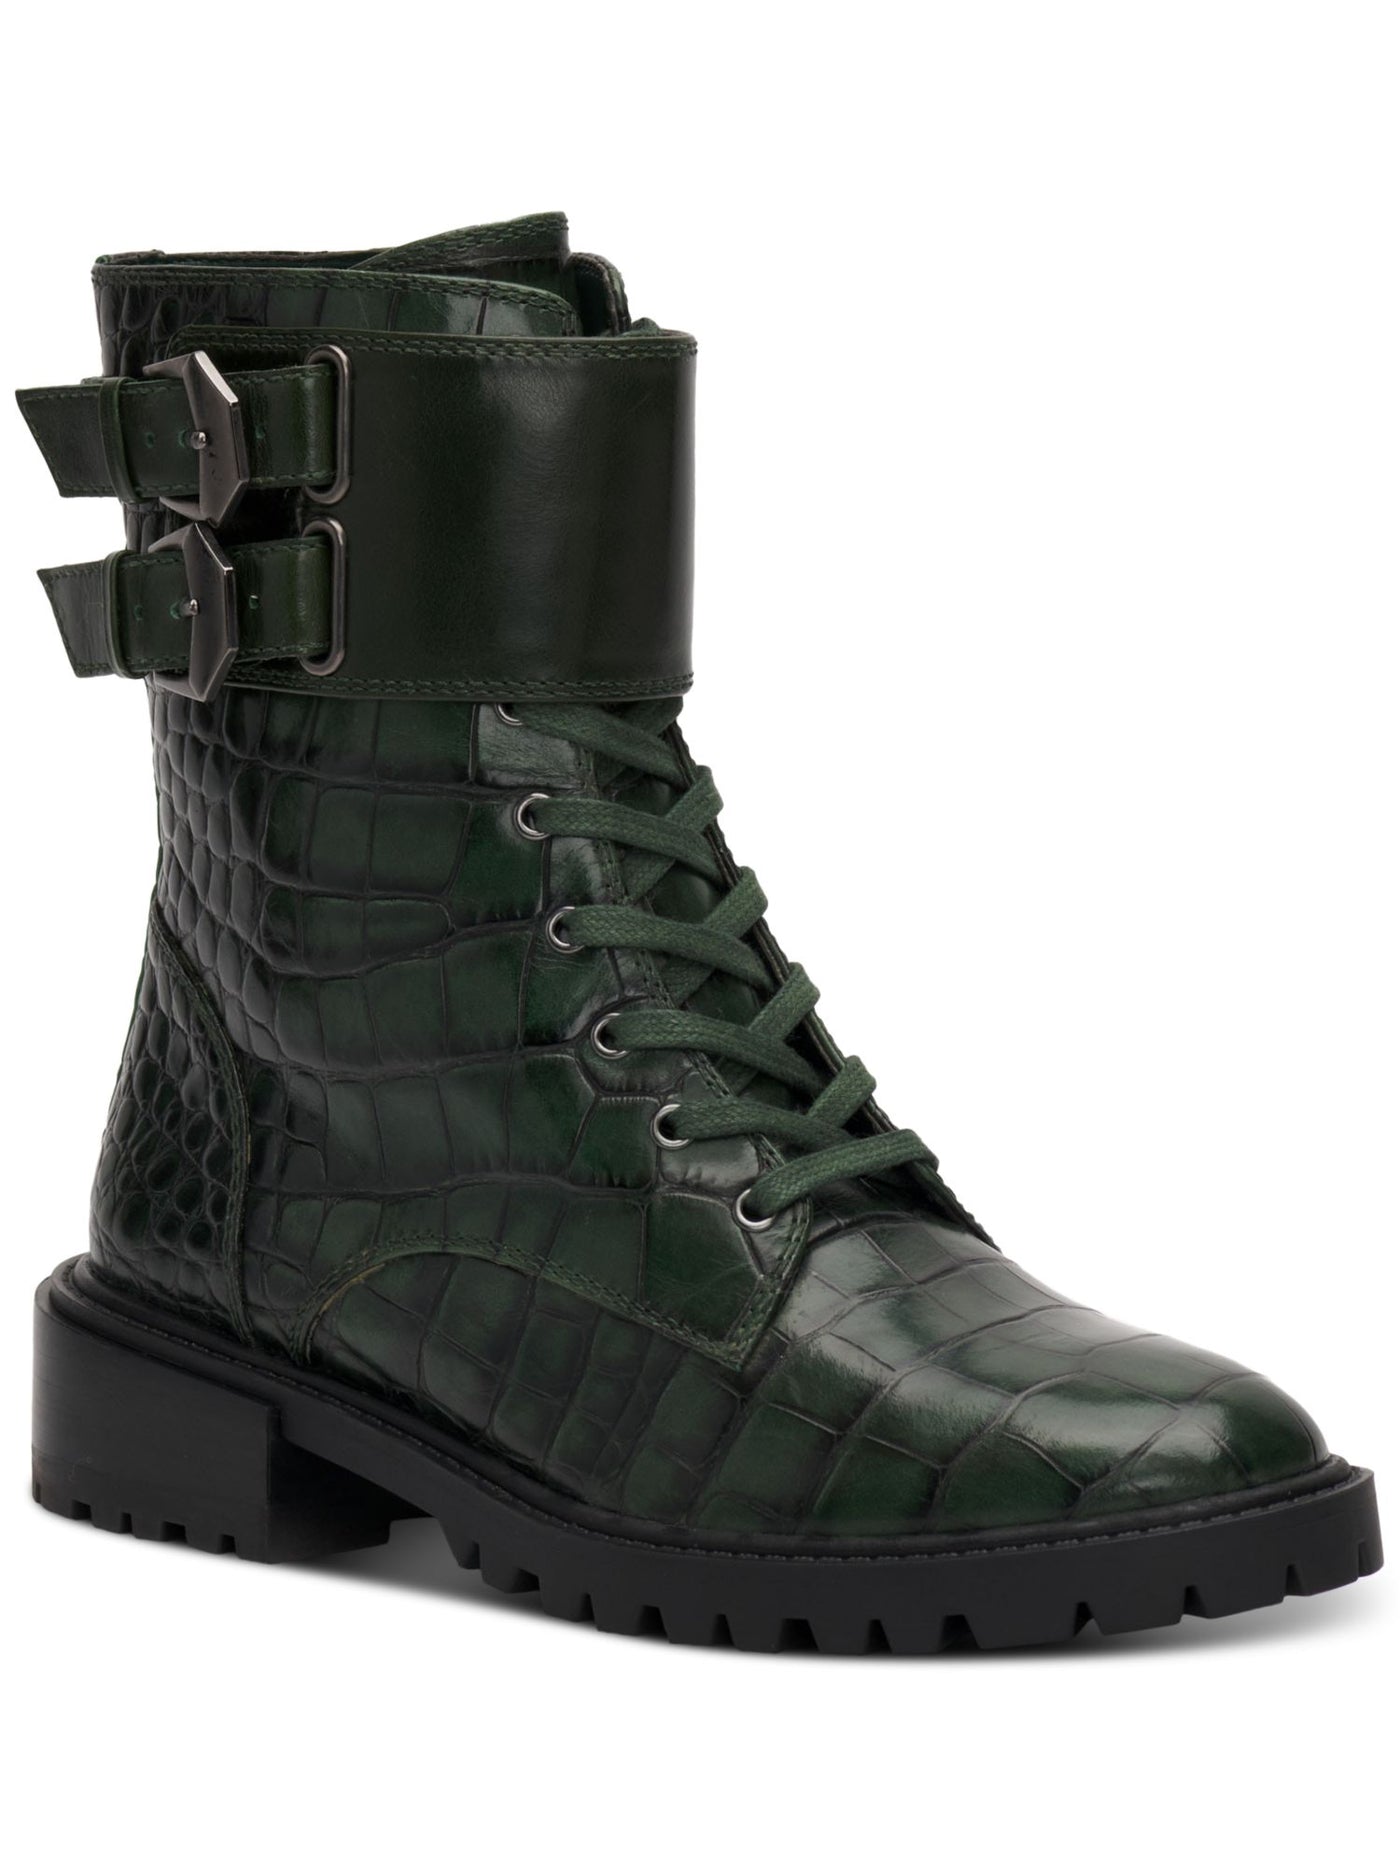 VINCE CAMUTO Womens Green Animal Print Lug Sole Lace Up Buckle Accent Padded Fawdry Round Toe Block Heel Zip-Up Leather Combat Boots 6.5 M